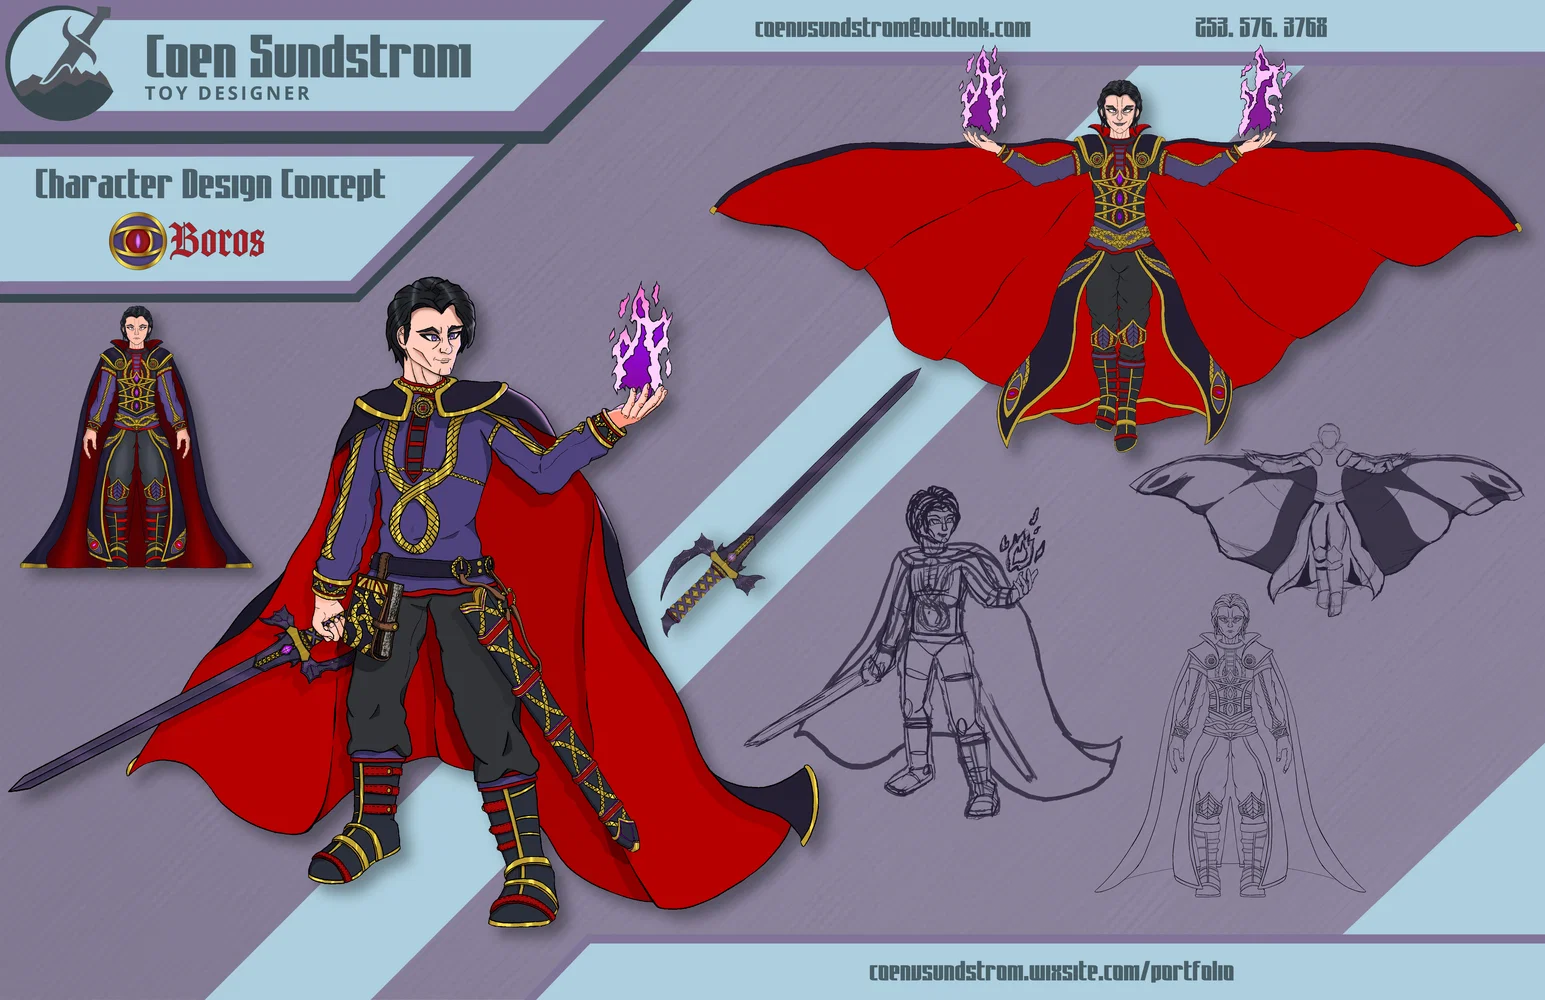 Character is a D&D inspired adventurer in dressed in purple, red, and gold.